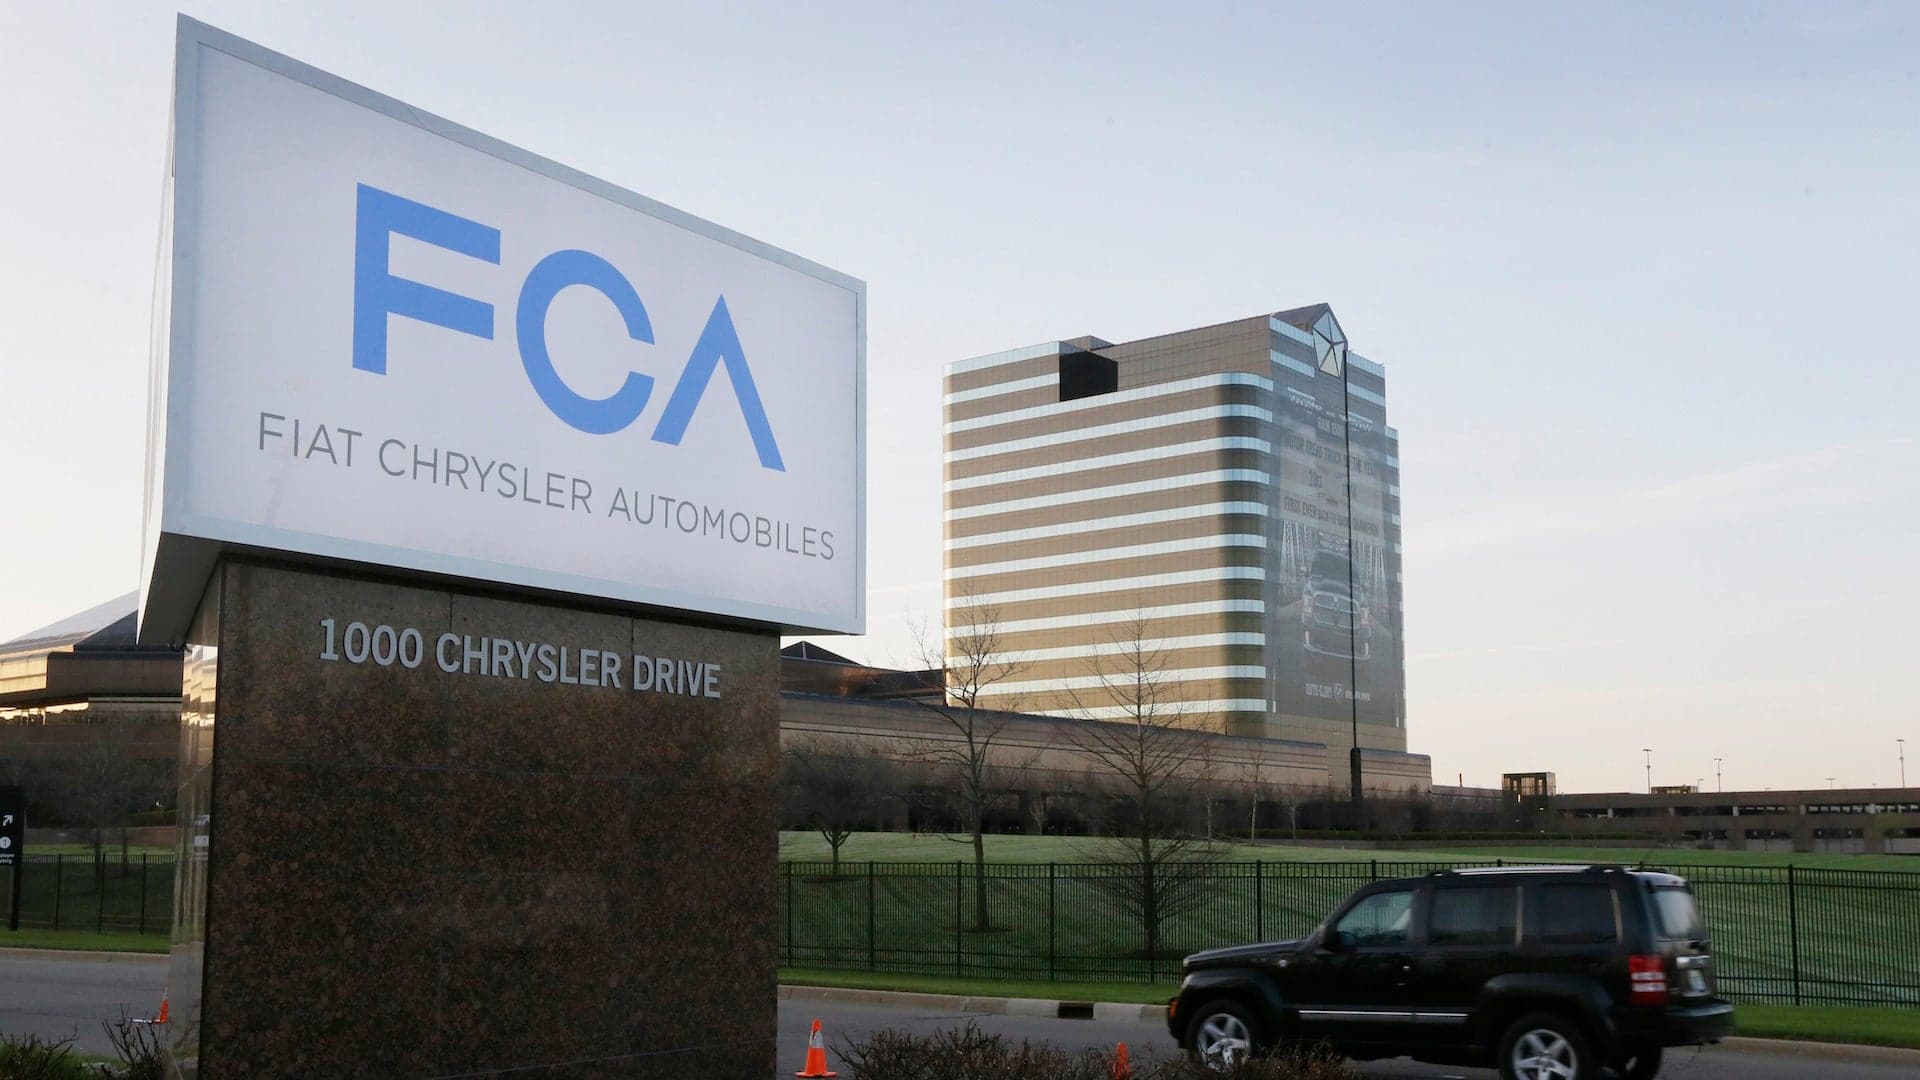 Man Stole $2 Million Worth of Plastic Bins from Fiat Chrysler, Feds Say